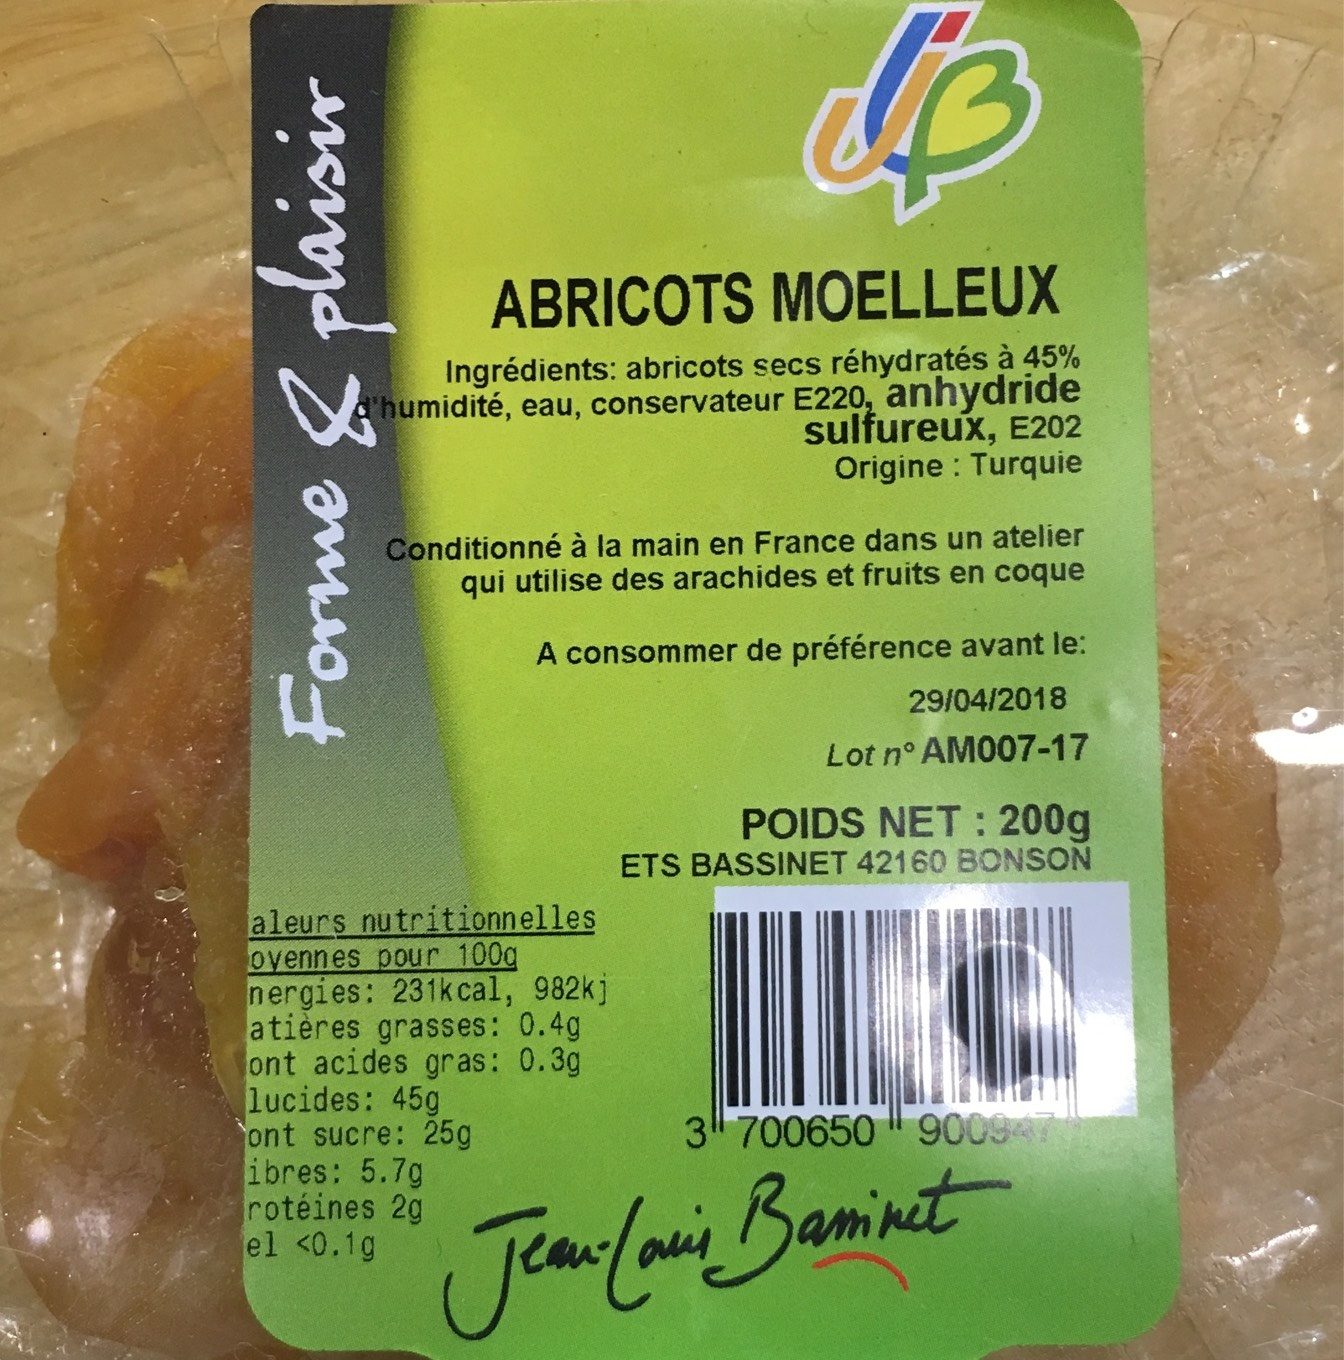 Abricots moelleux - Product - fr